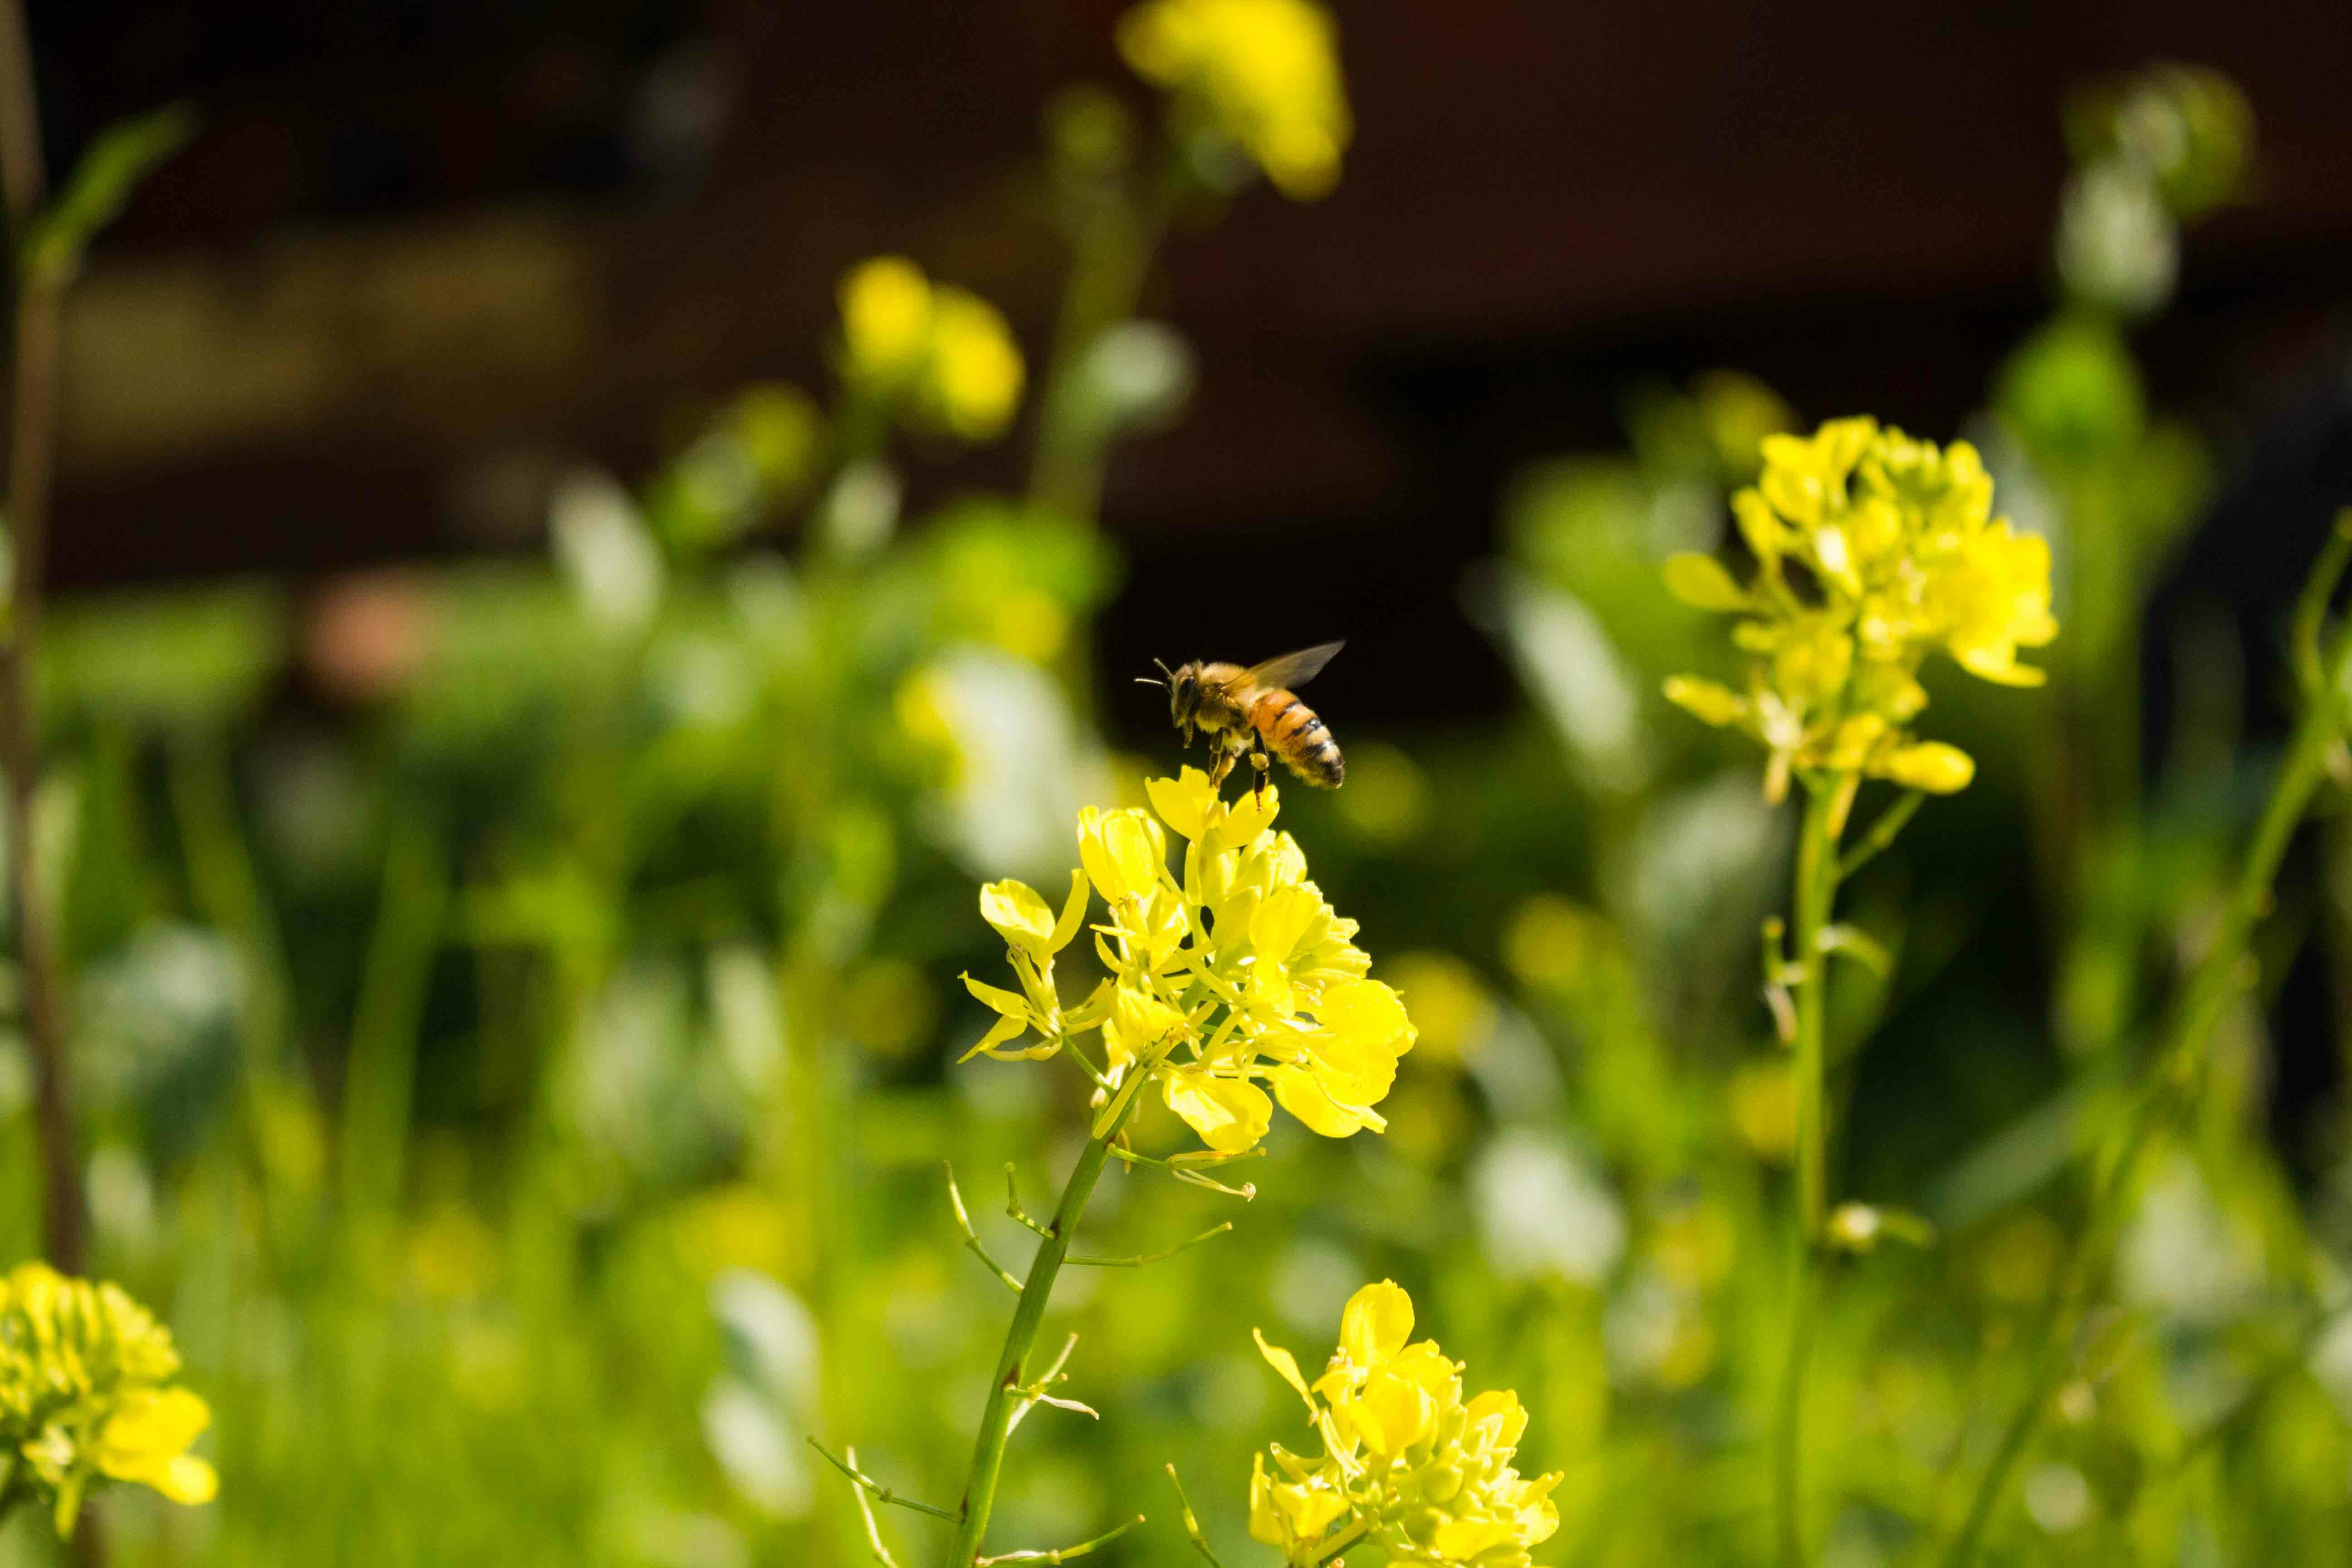 A honey bee lands on a bright yellow flower framed by other yellow flowers in a green field. 